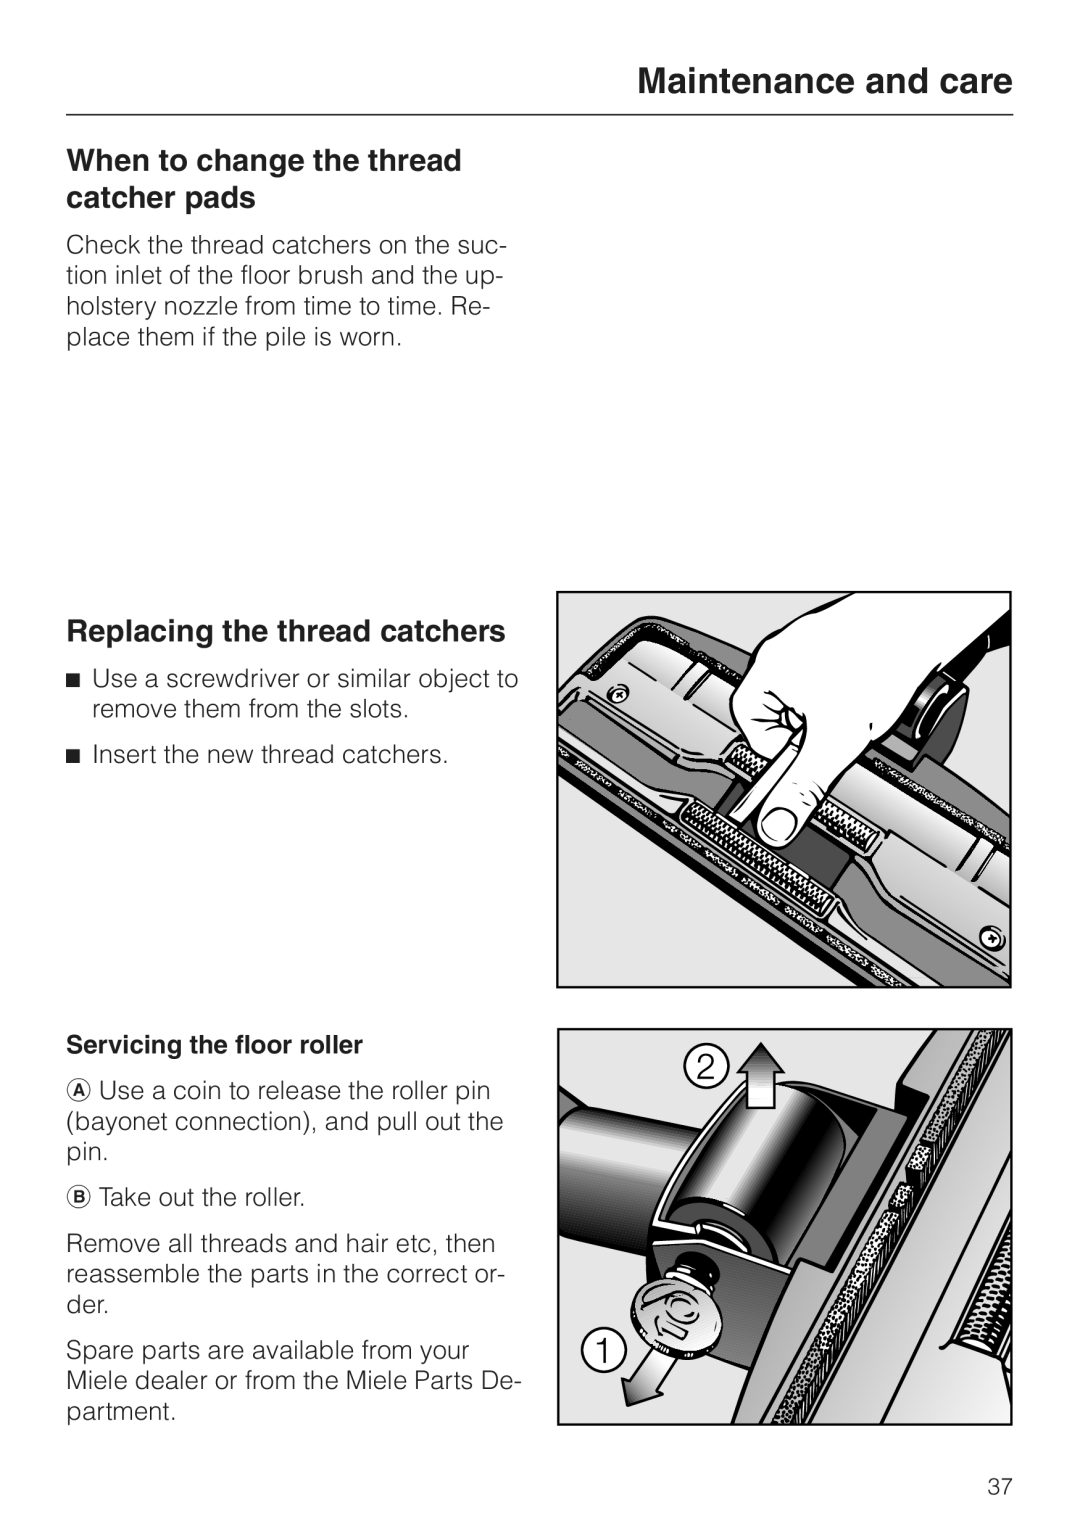 Miele S 600 - S 648 manual When to change the thread catcher pads, Replacing the thread catchers, Maintenance and care 